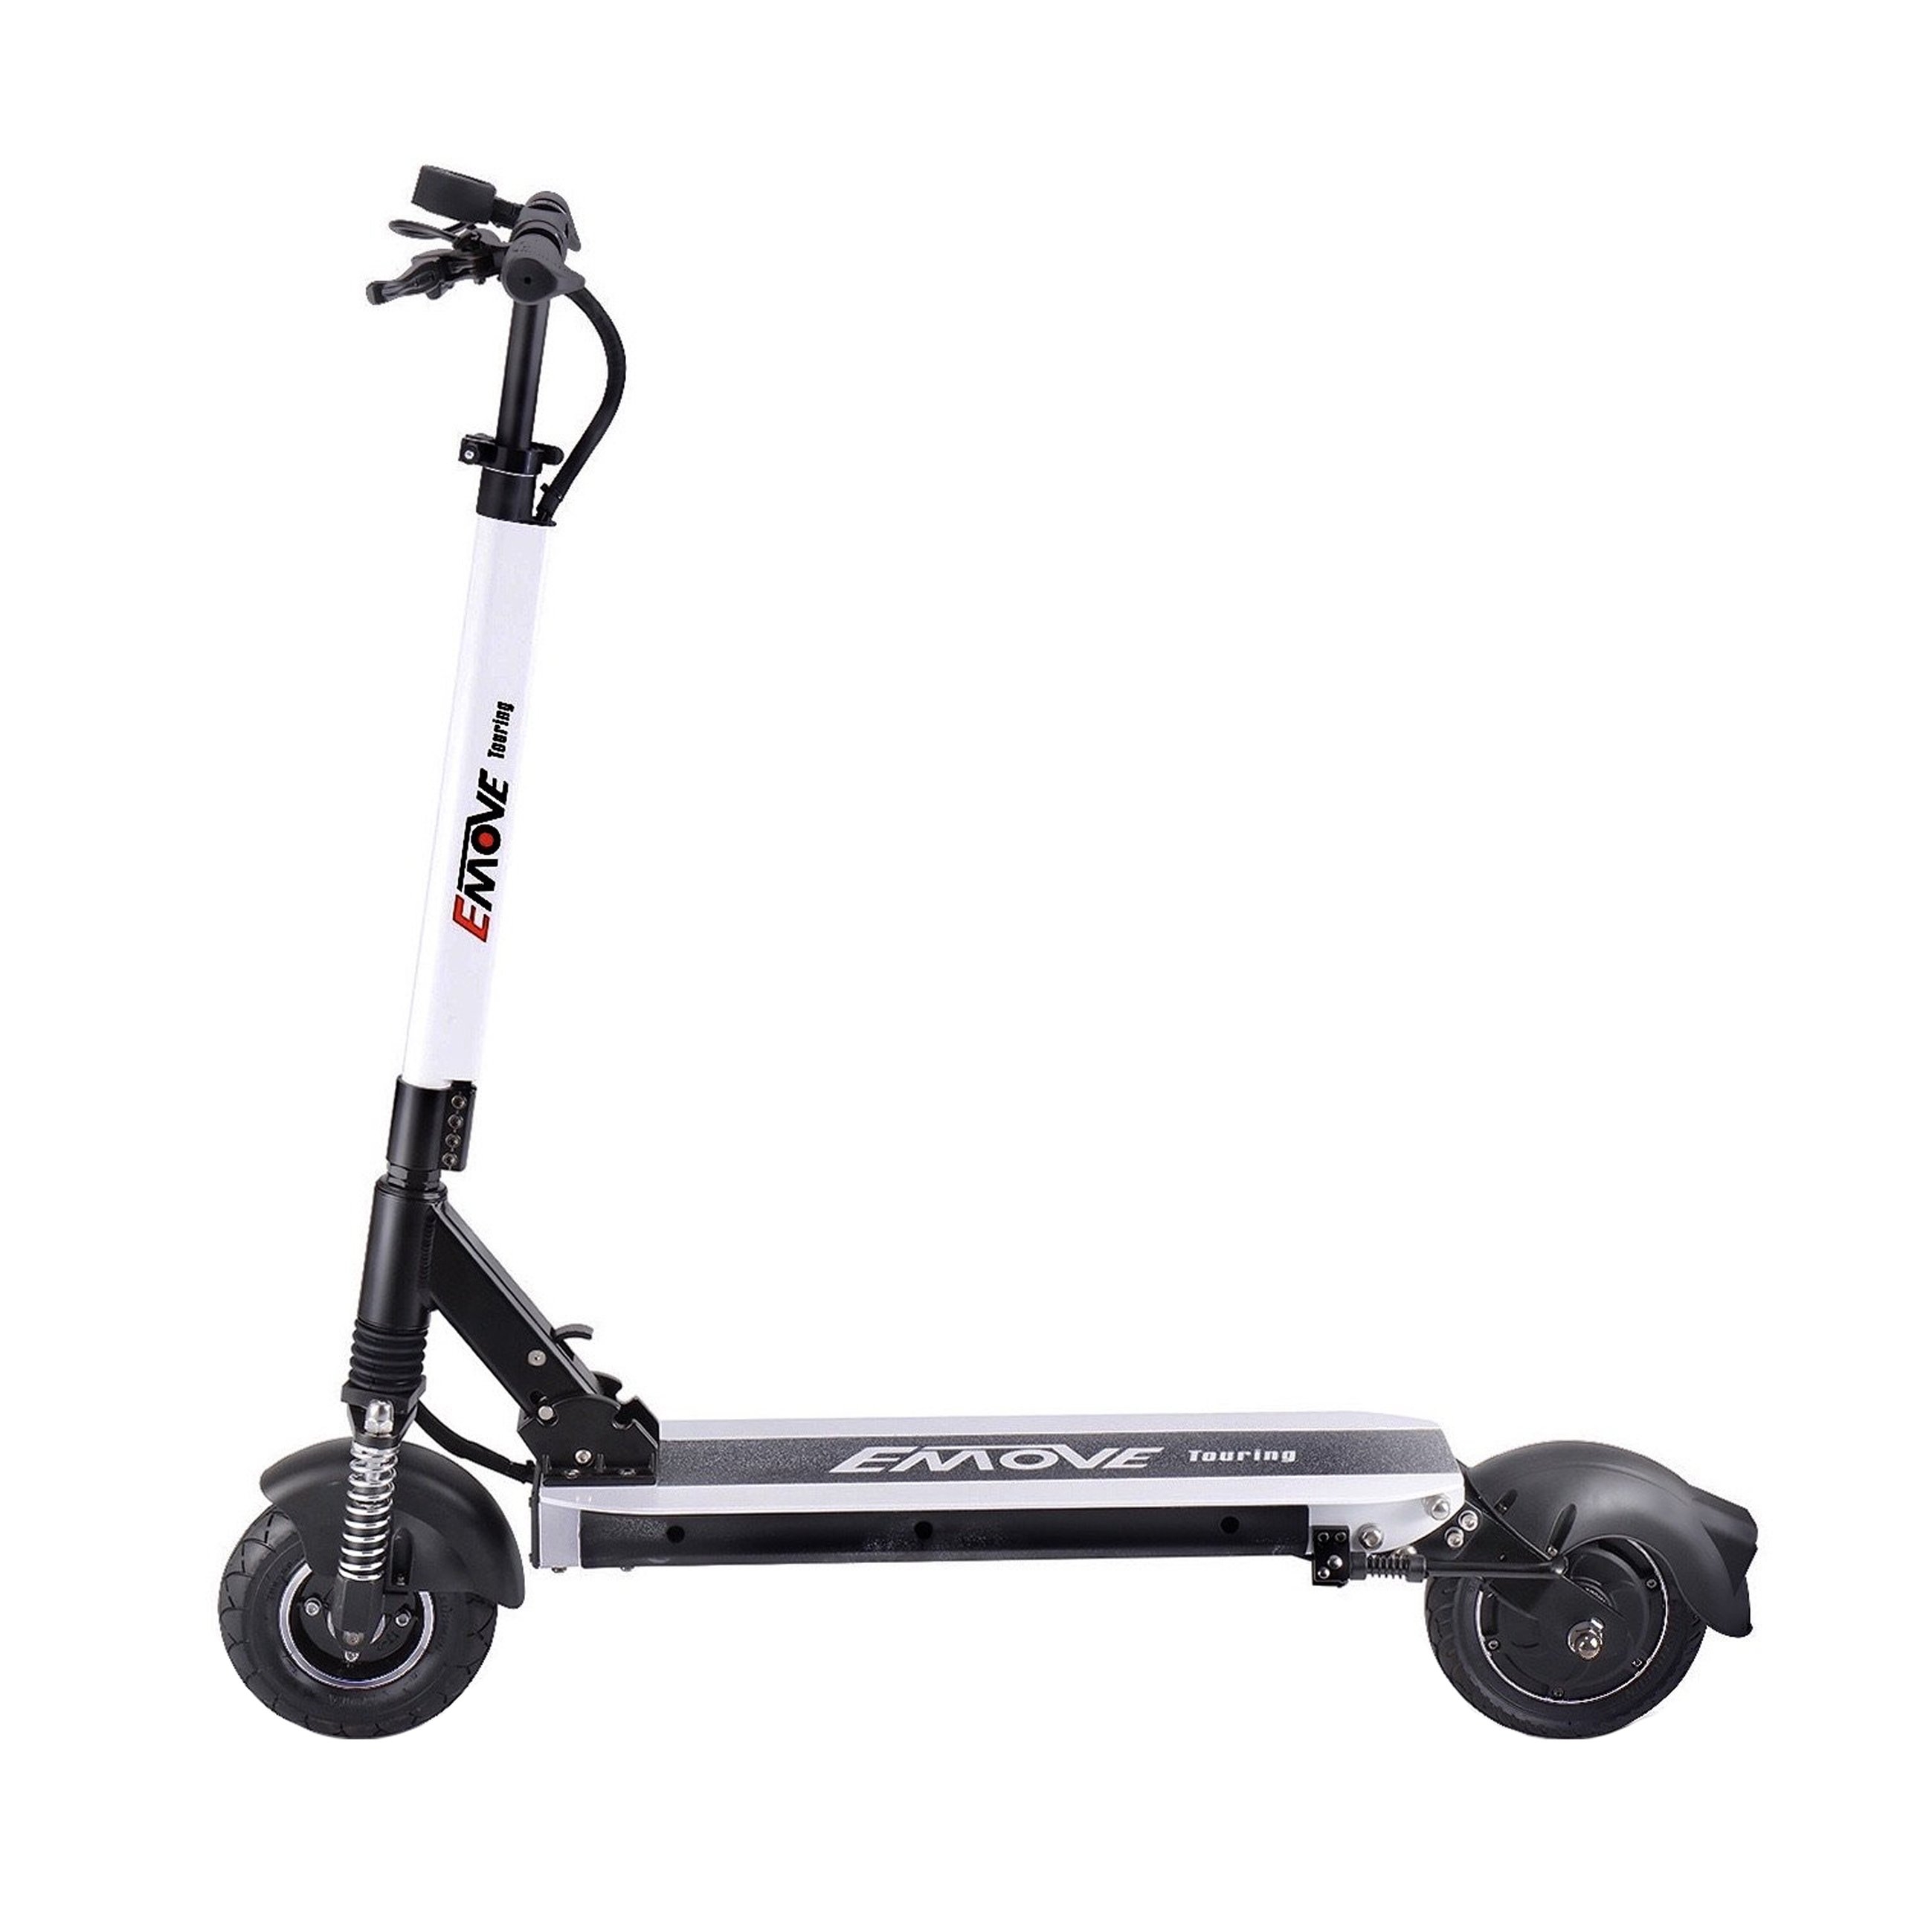 Emove Touring Electric Scooter – White